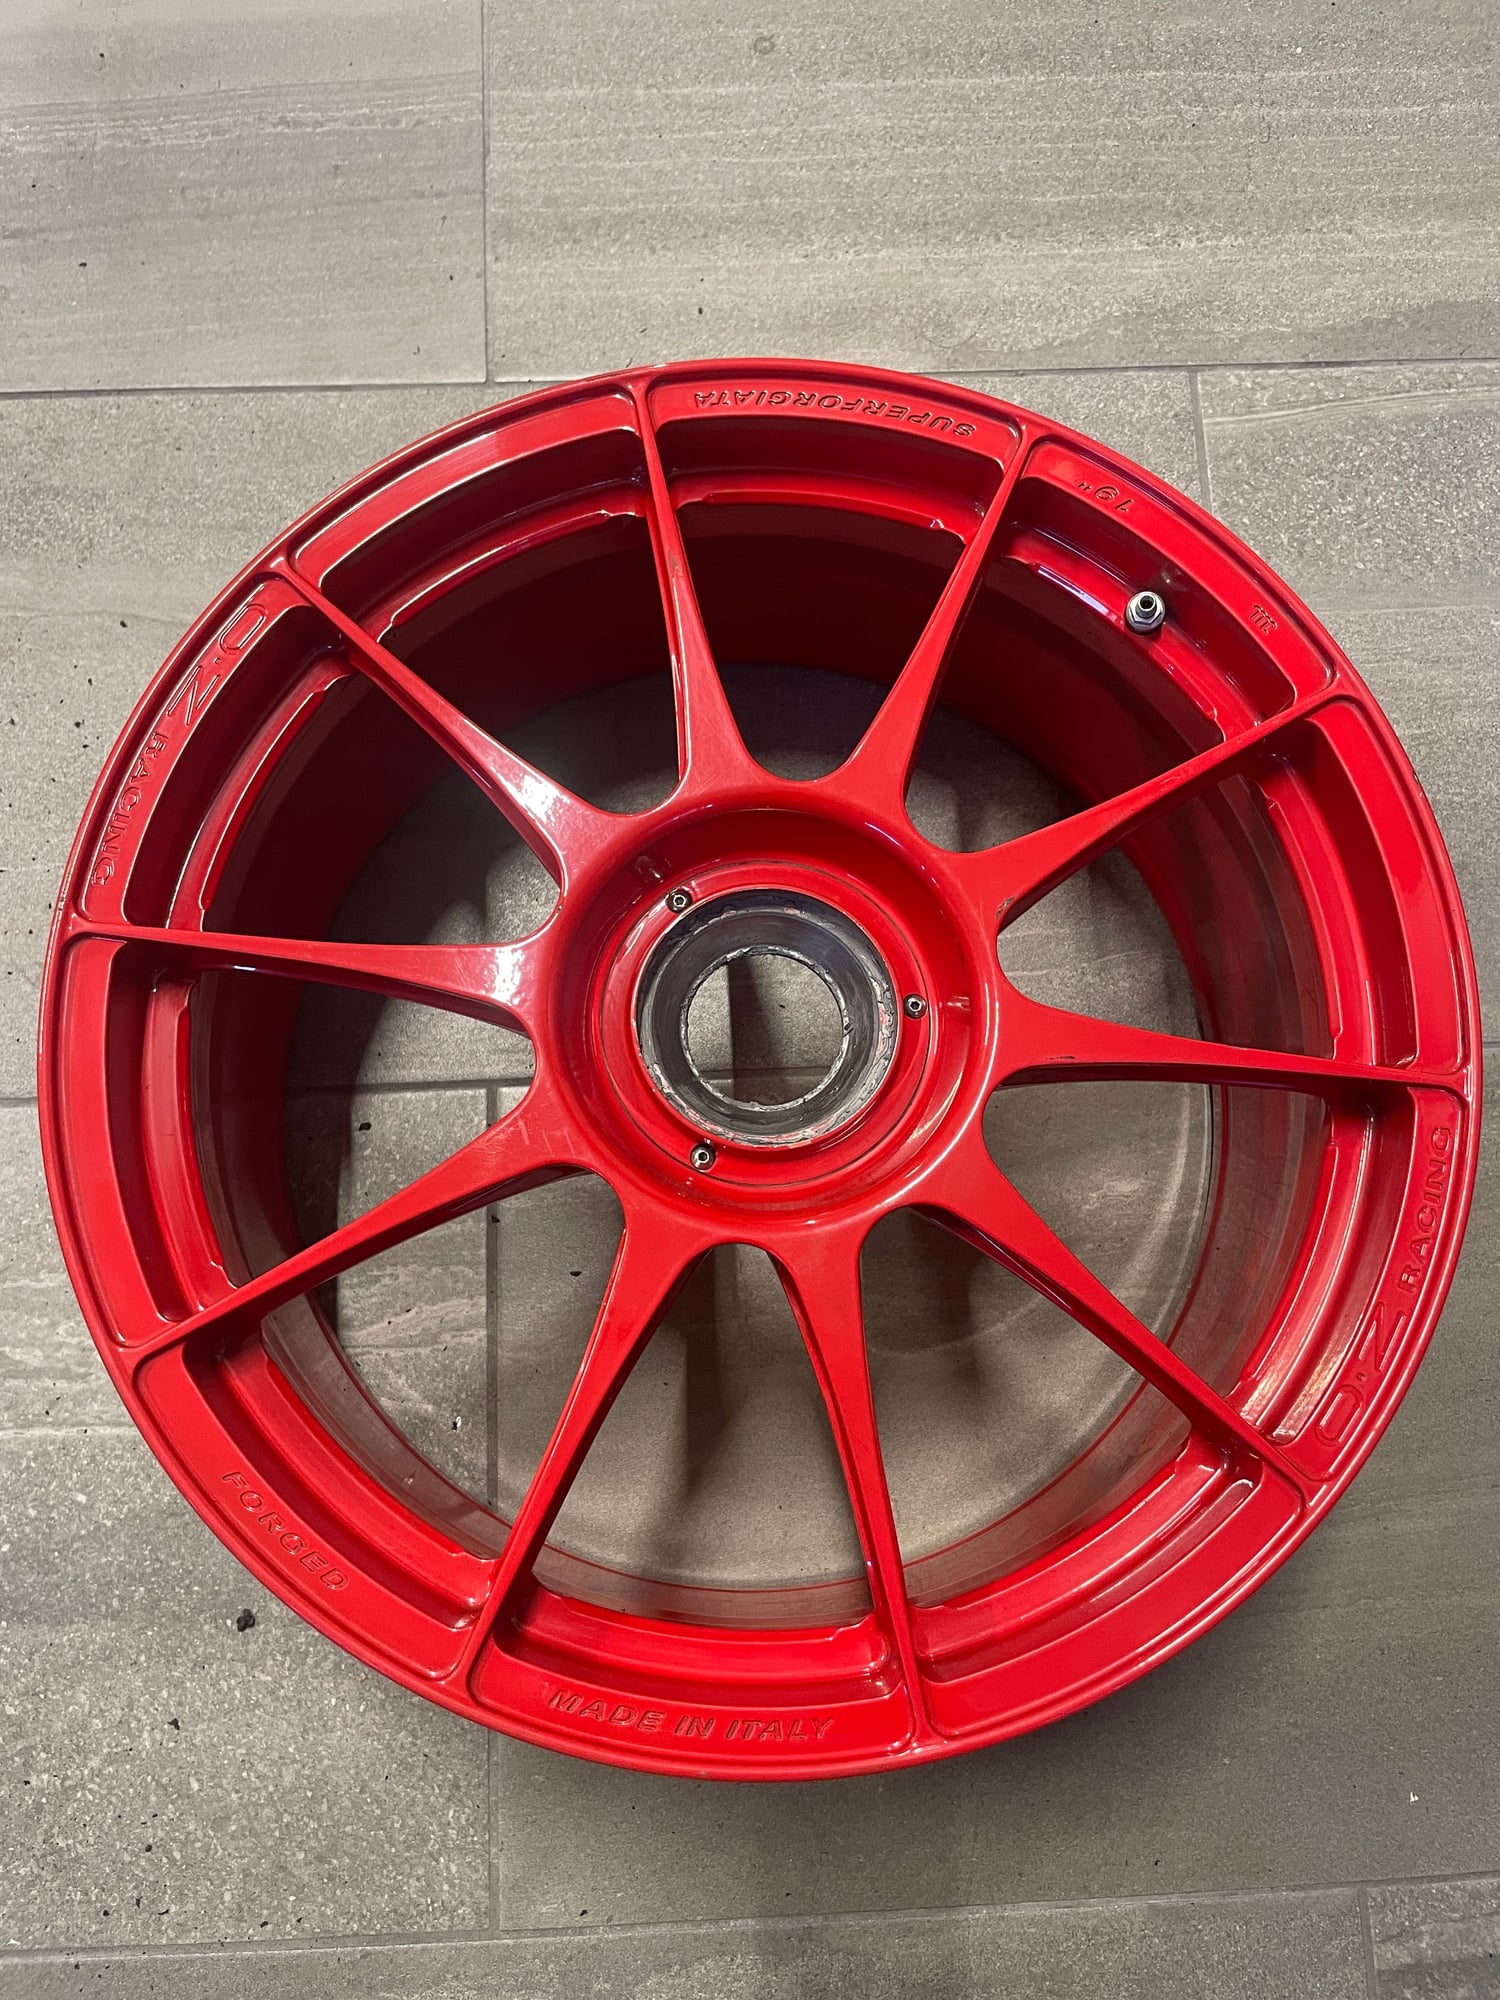 Wheels and Tires/Axles - OZ 19" Centerlock Wheels Guards Red - Used - 2010 to 2012 Porsche 911 - Gilbert, AZ 85297, United States